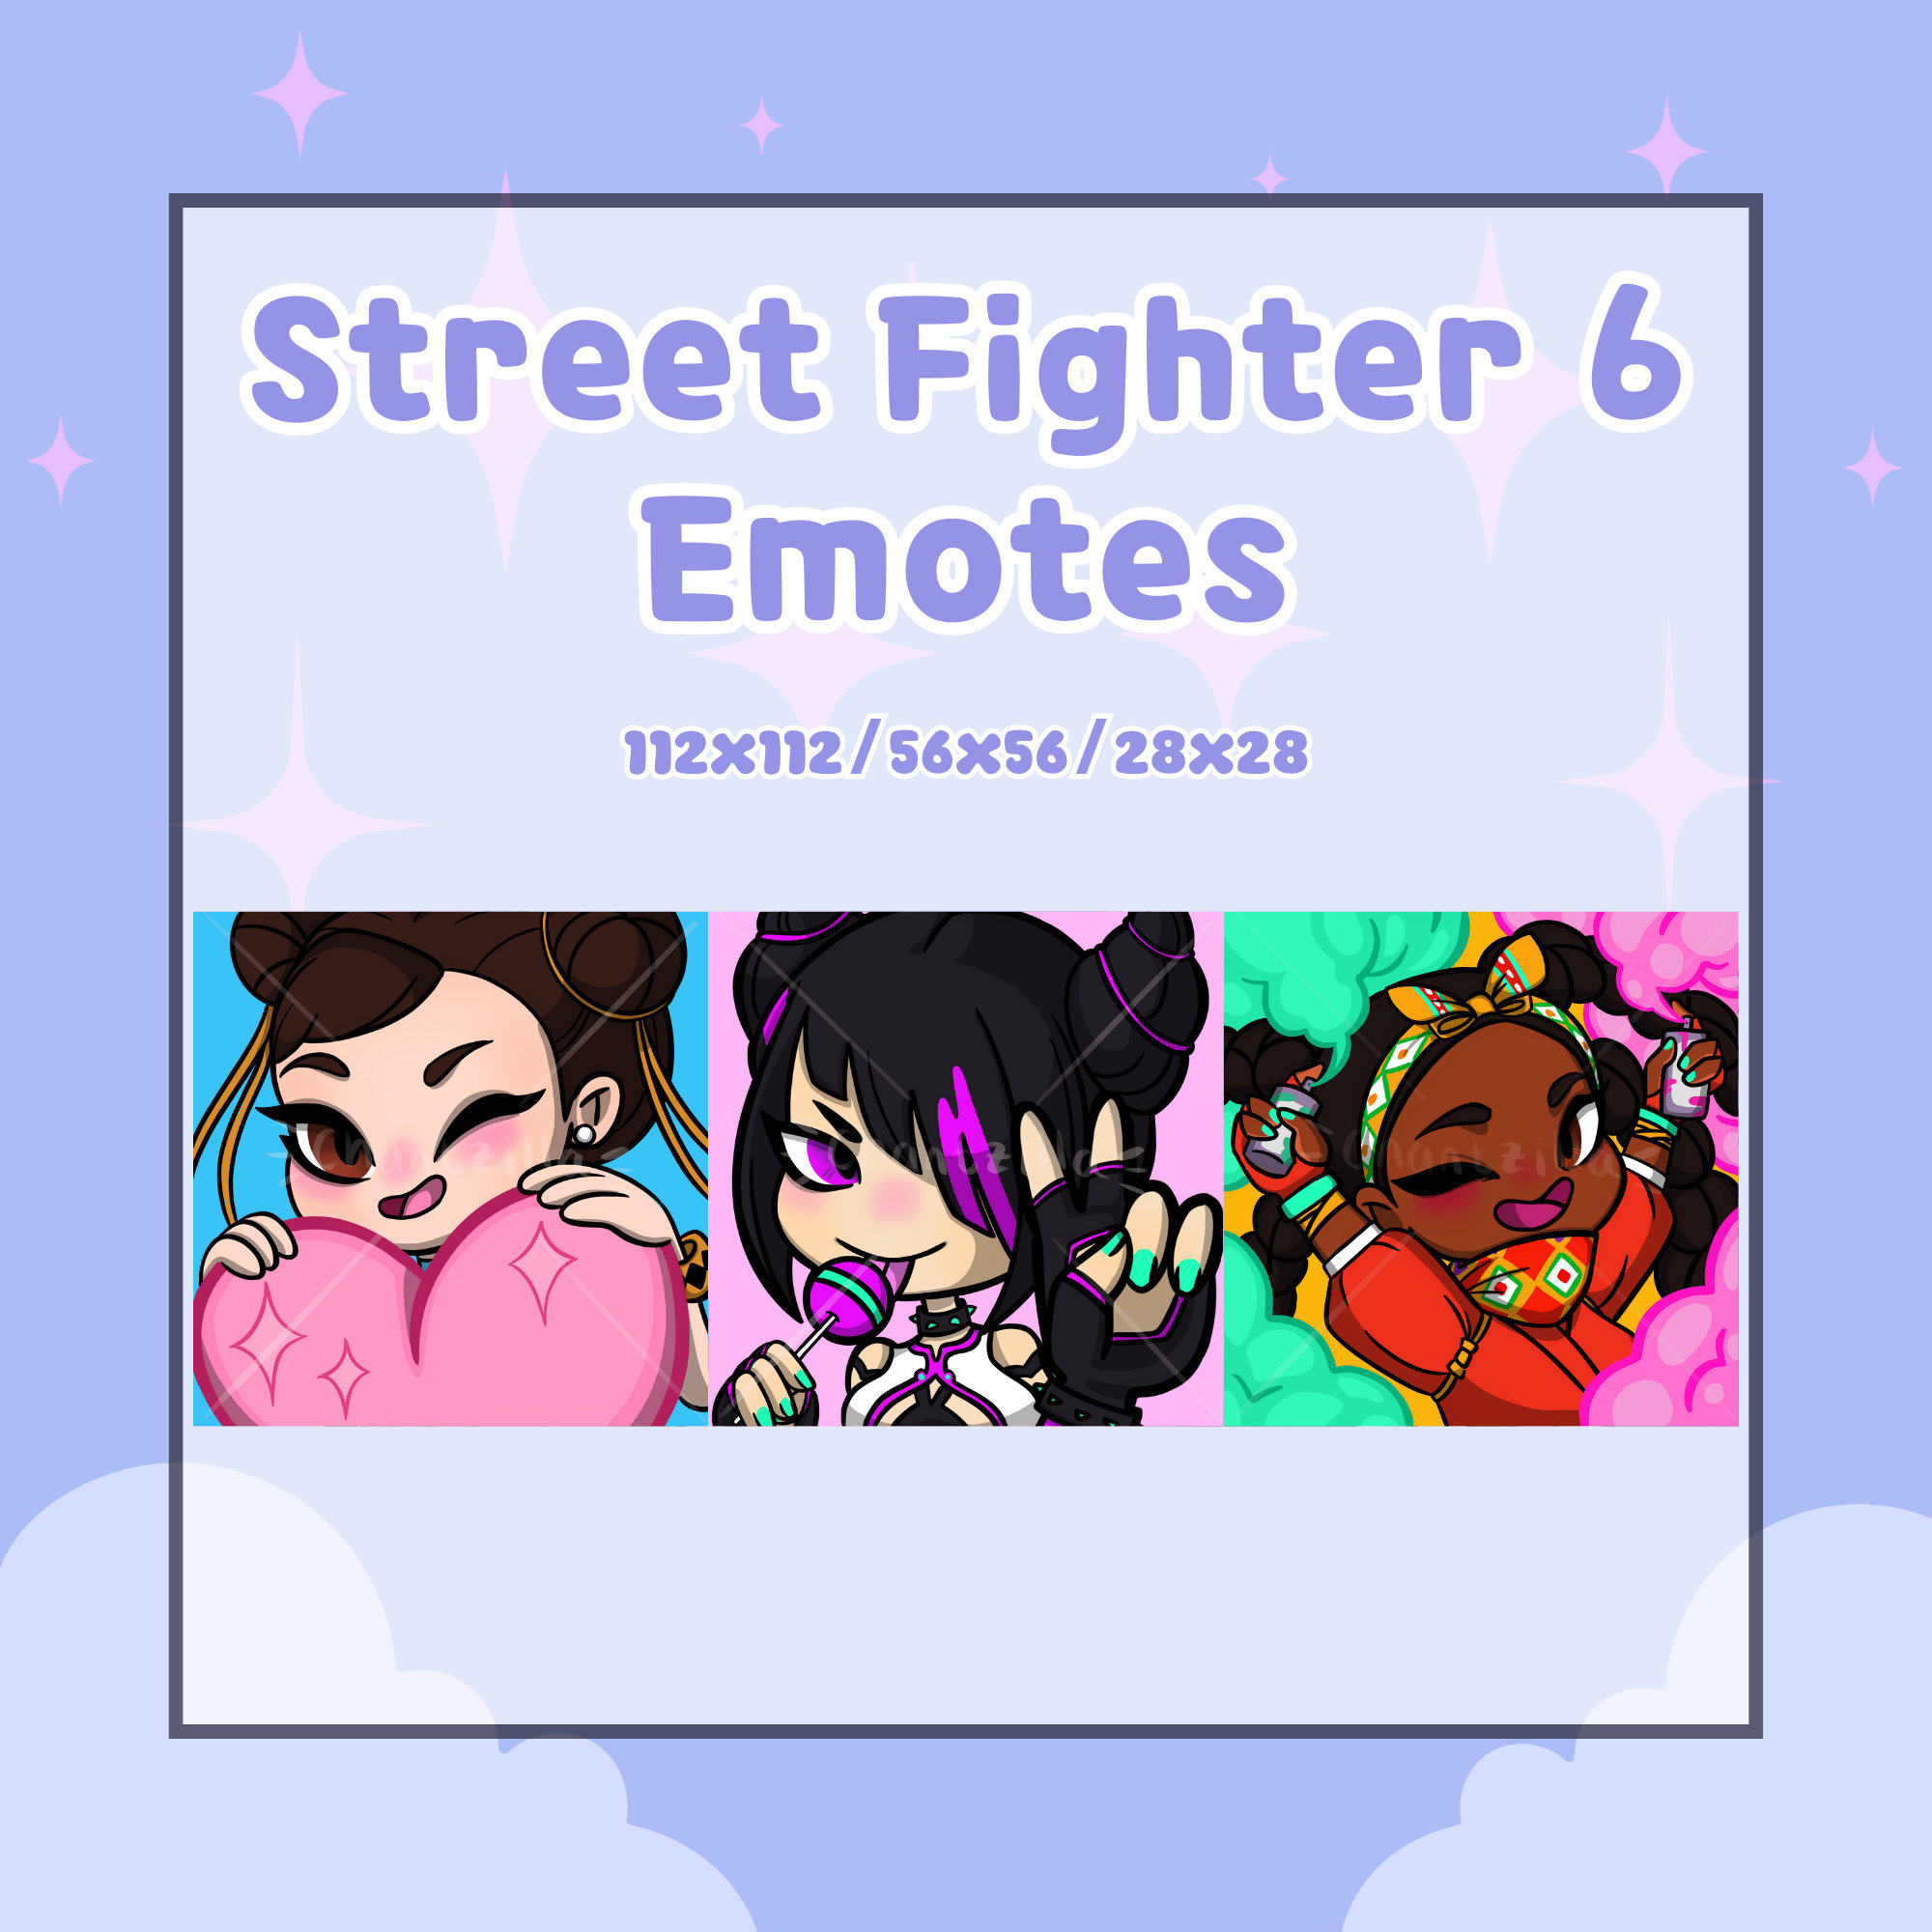 12 Ryu from Street Fighter Emotes for Twitch Streamers, Discord,  -  Cute - Anime - Chibi - Emote Bundle - Emote Pack